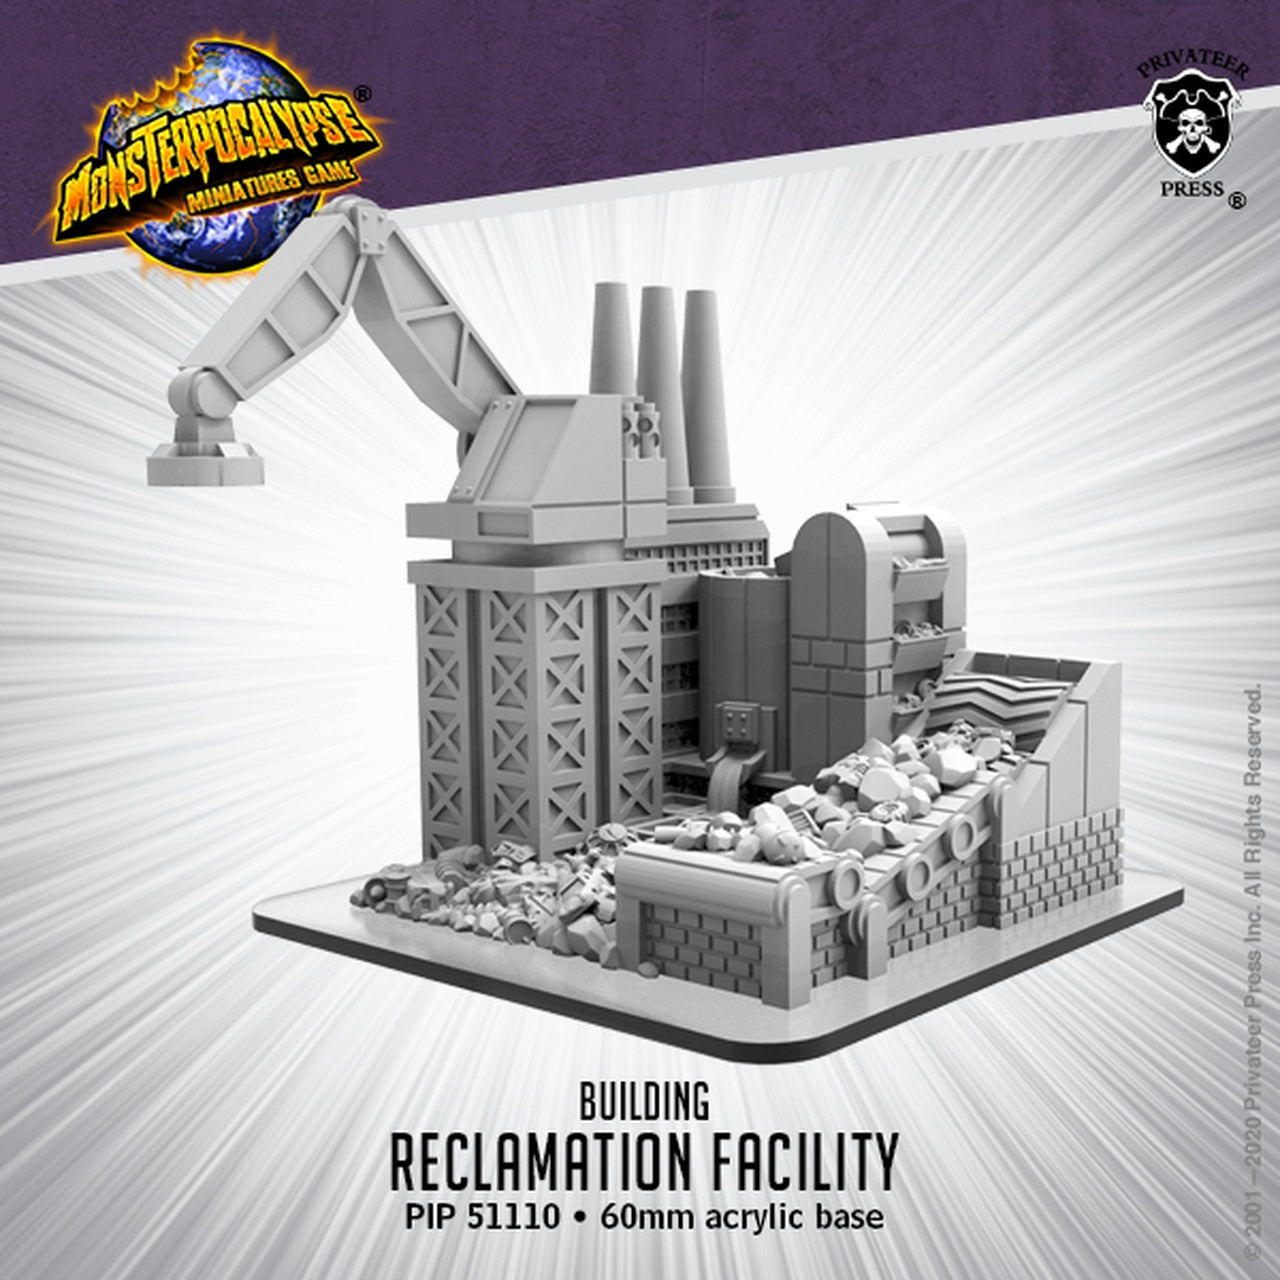 Reclamation Facility | Gopher Games